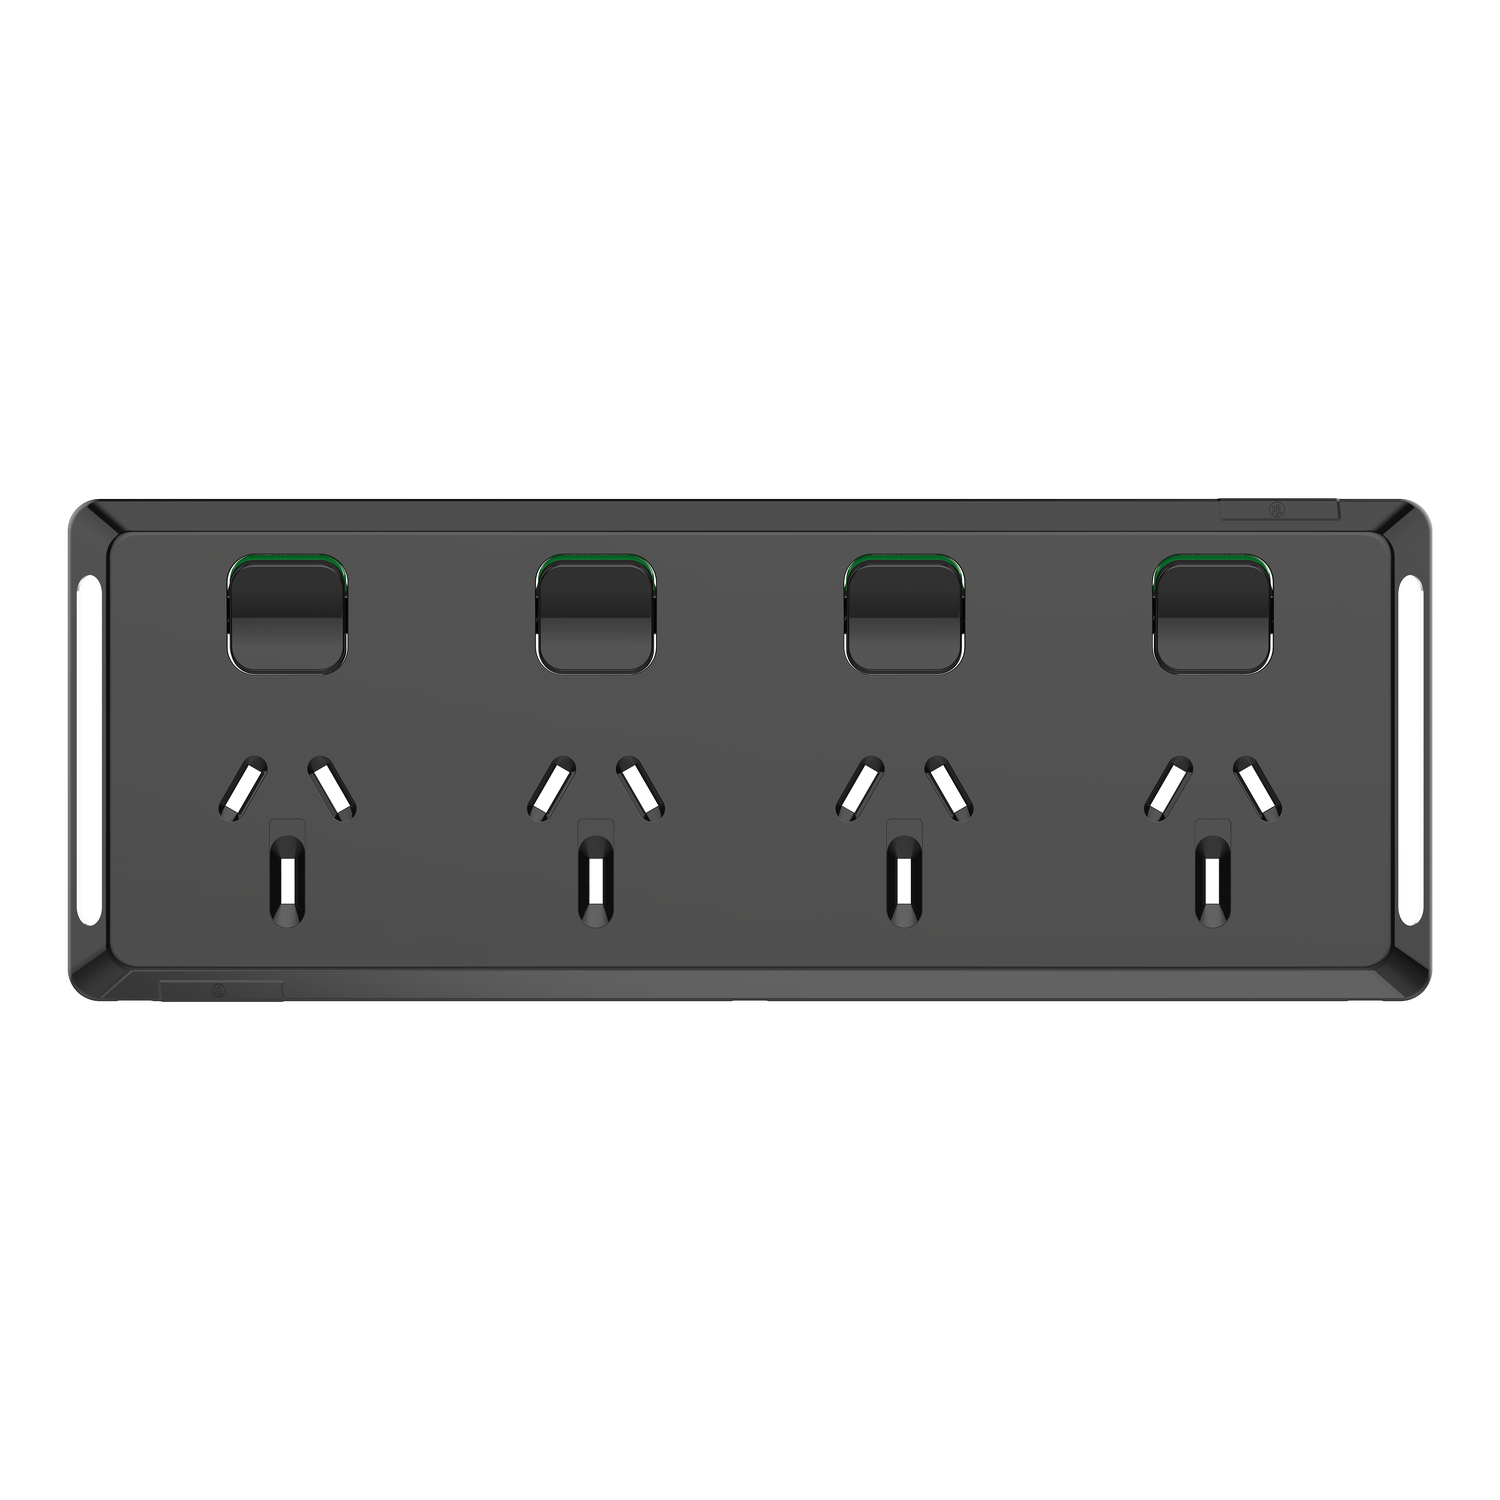 PDL Pro Series - Cover Plate Quad Swiched Socket 10A Horizontal - Black